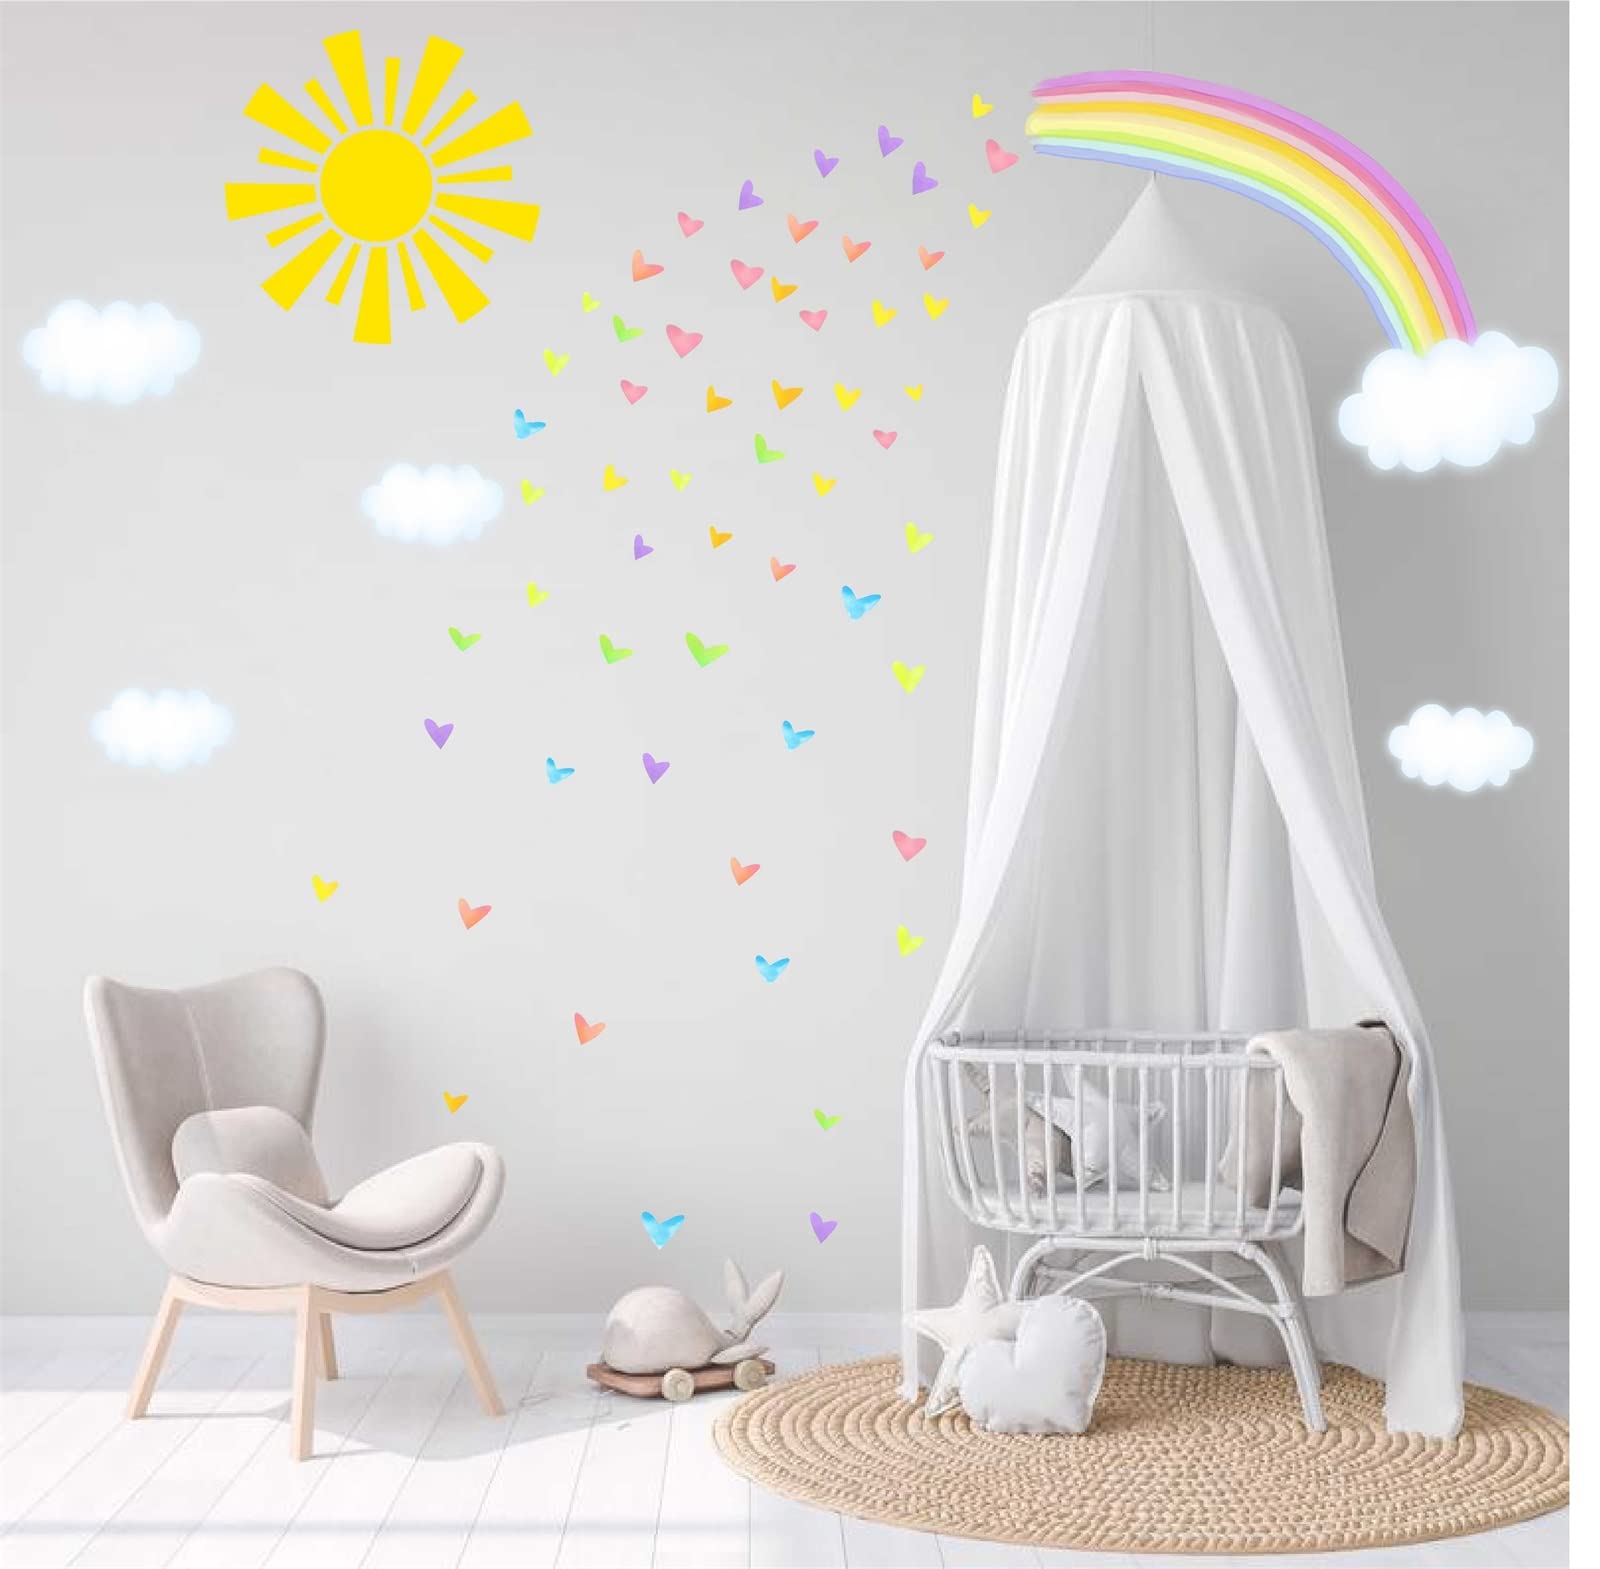 Colorful Rainbow Wall Decals Sun Cloud Wall Decals Colorful Heart Wall Stickers Watercolor Yellow Sun Decal Large Rainbow Wall Stickers for Girls Room Kids Bedroom Nursery Decor